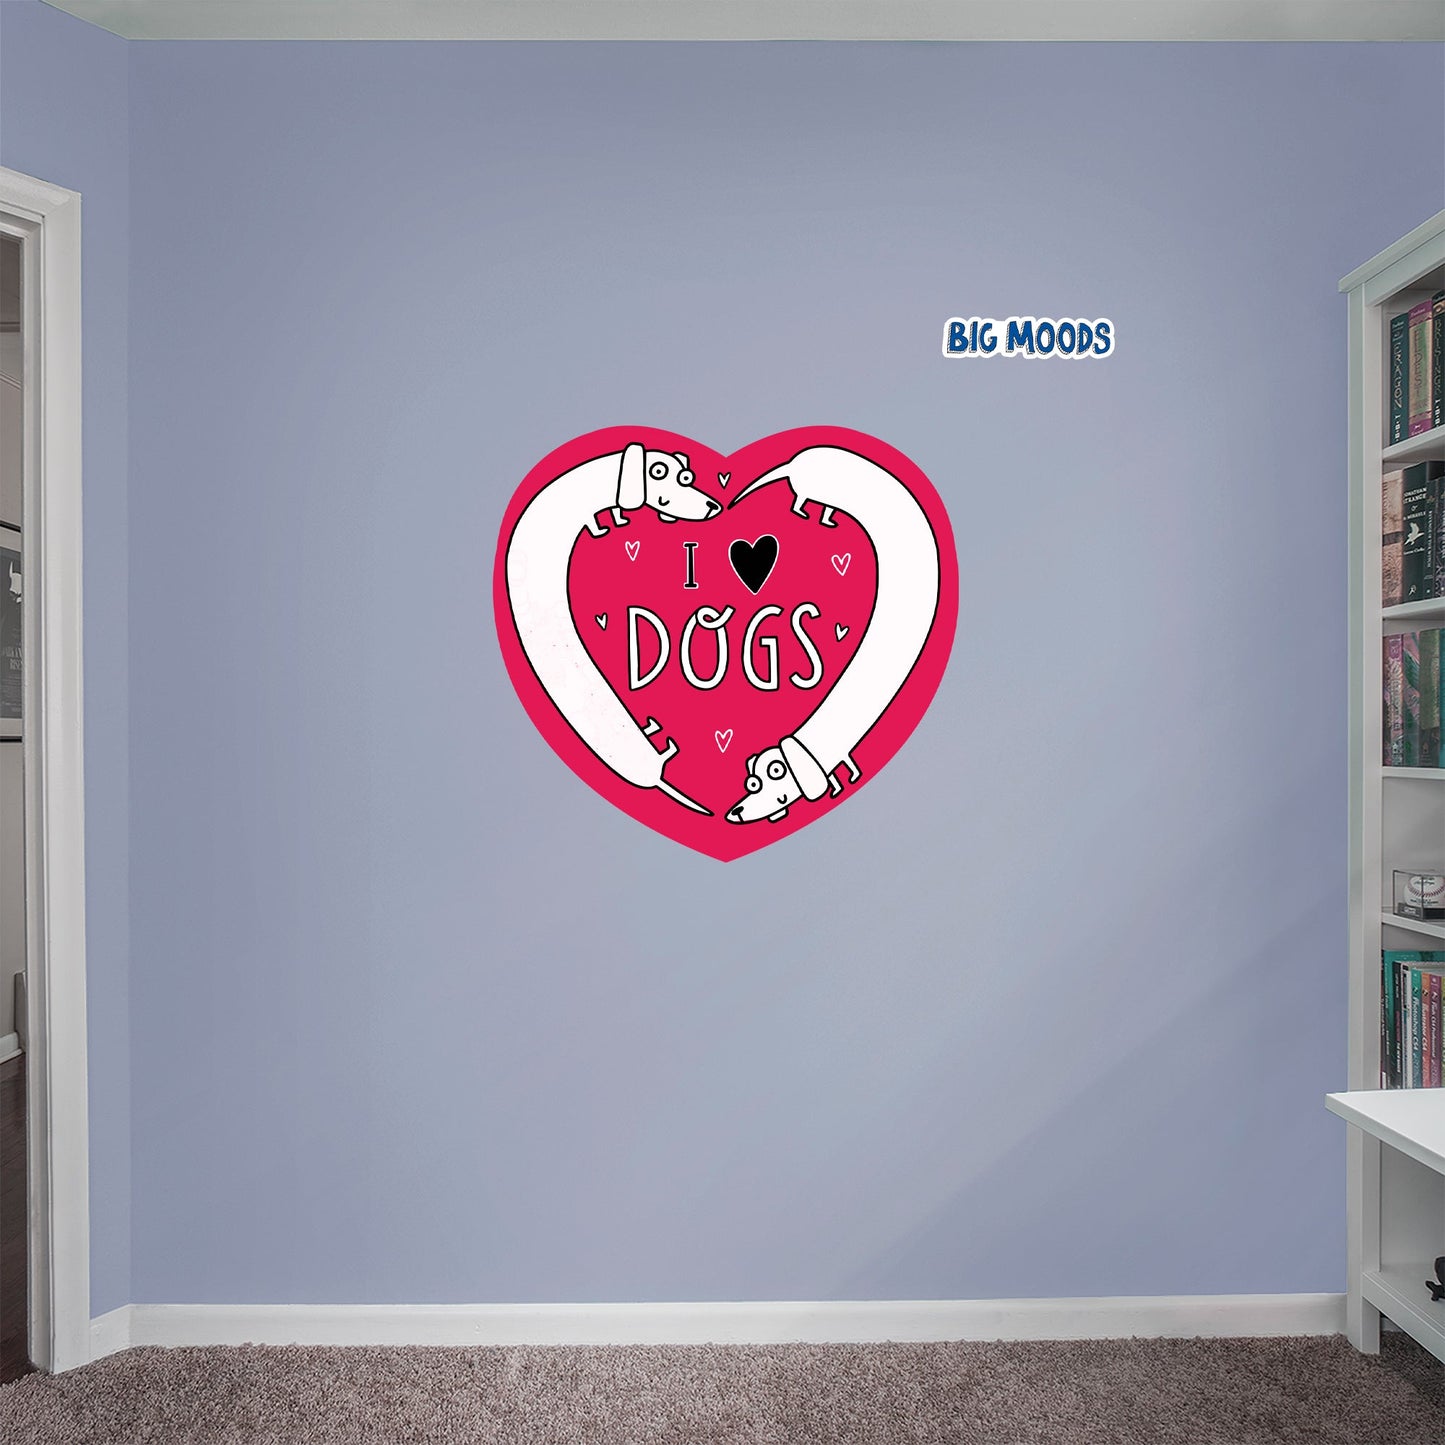 I LOVE DOGS        - Officially Licensed Big Moods Removable     Adhesive Decal